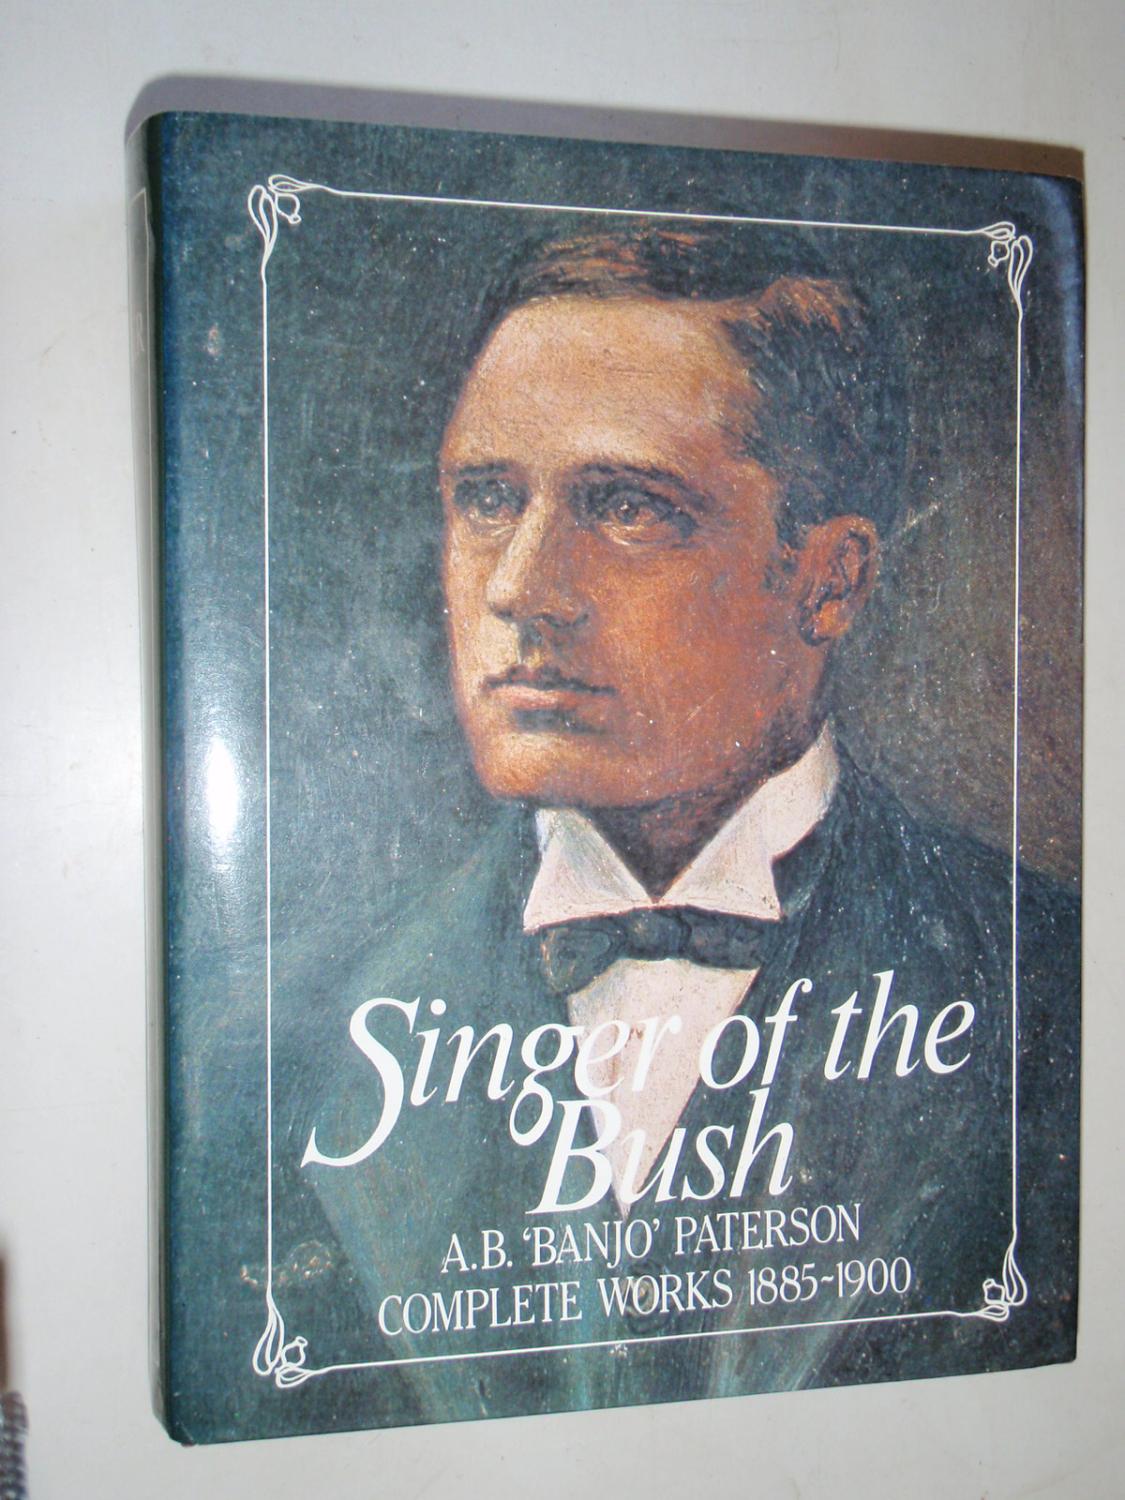 Singer of the bush: A.B. (Banjo) Paterson complete works 1885 - 1900